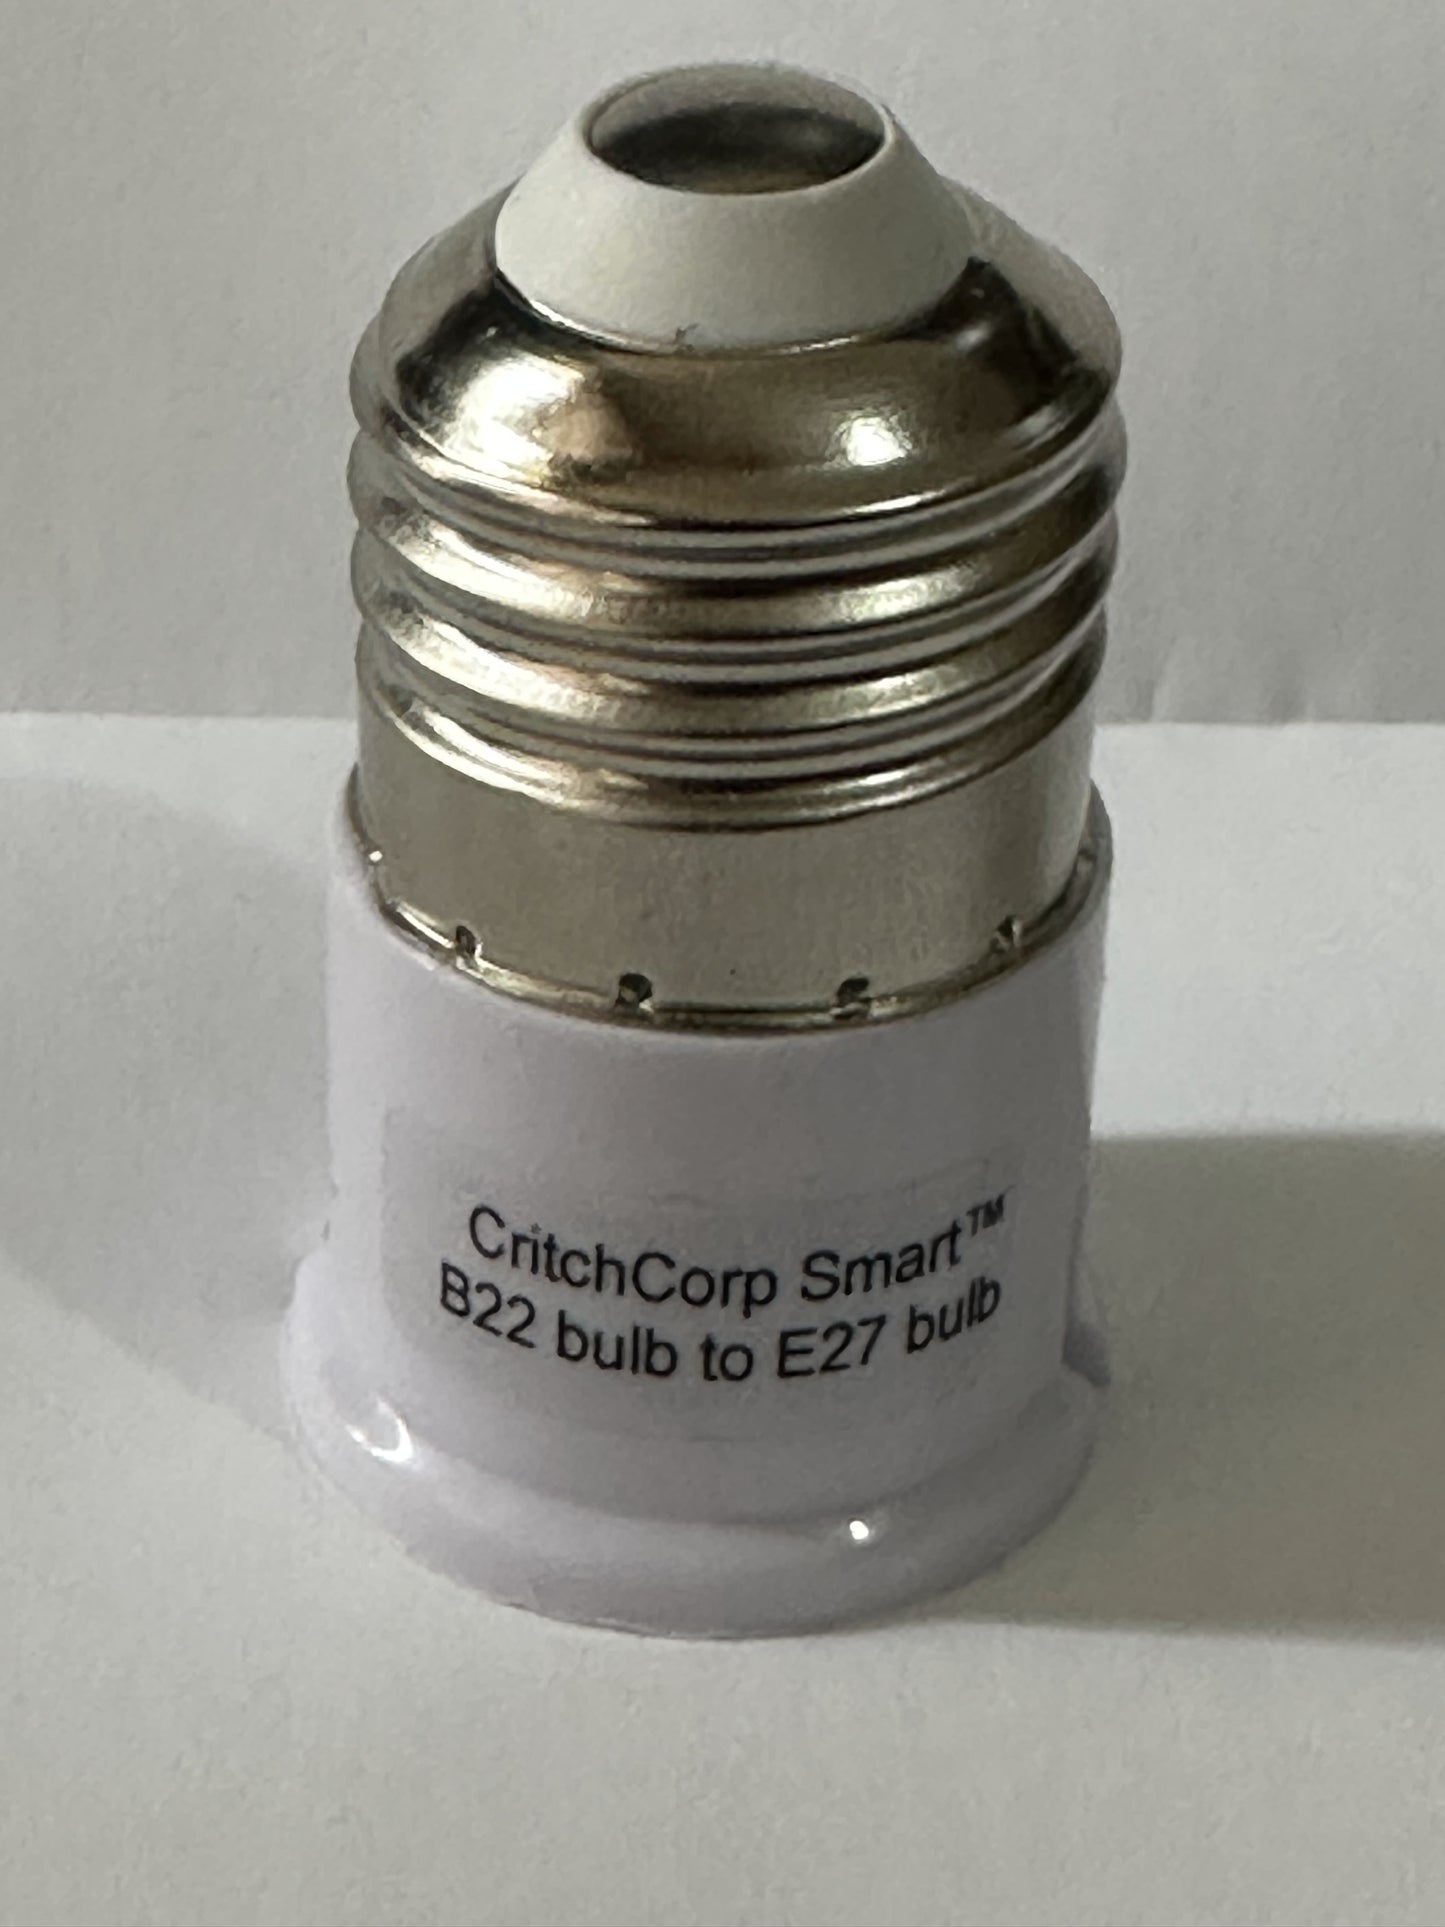 CritchCorp Smart™ B22 bulb Converter/Adapter to E27-Use your B22 bulb in an E27 socket